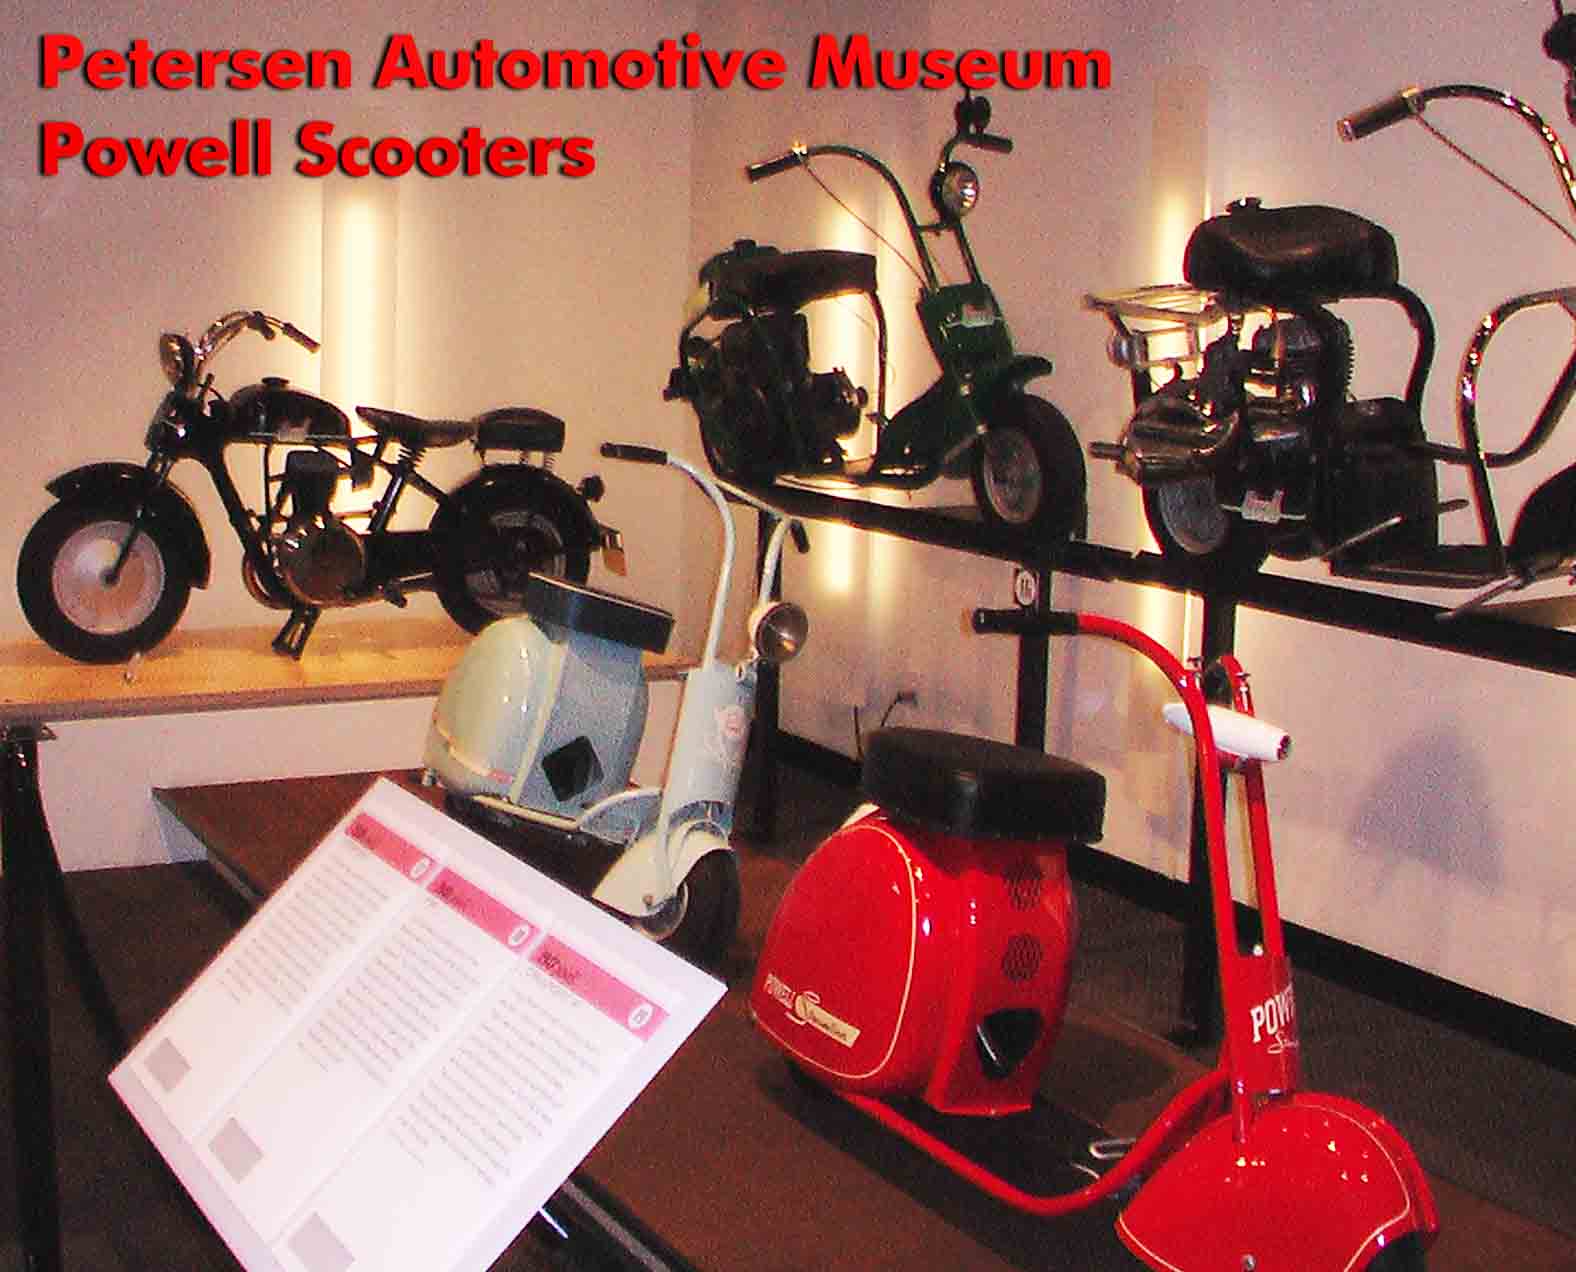 Powell Scooters display at the Petersen Automotive Museum Scooter Exhibit